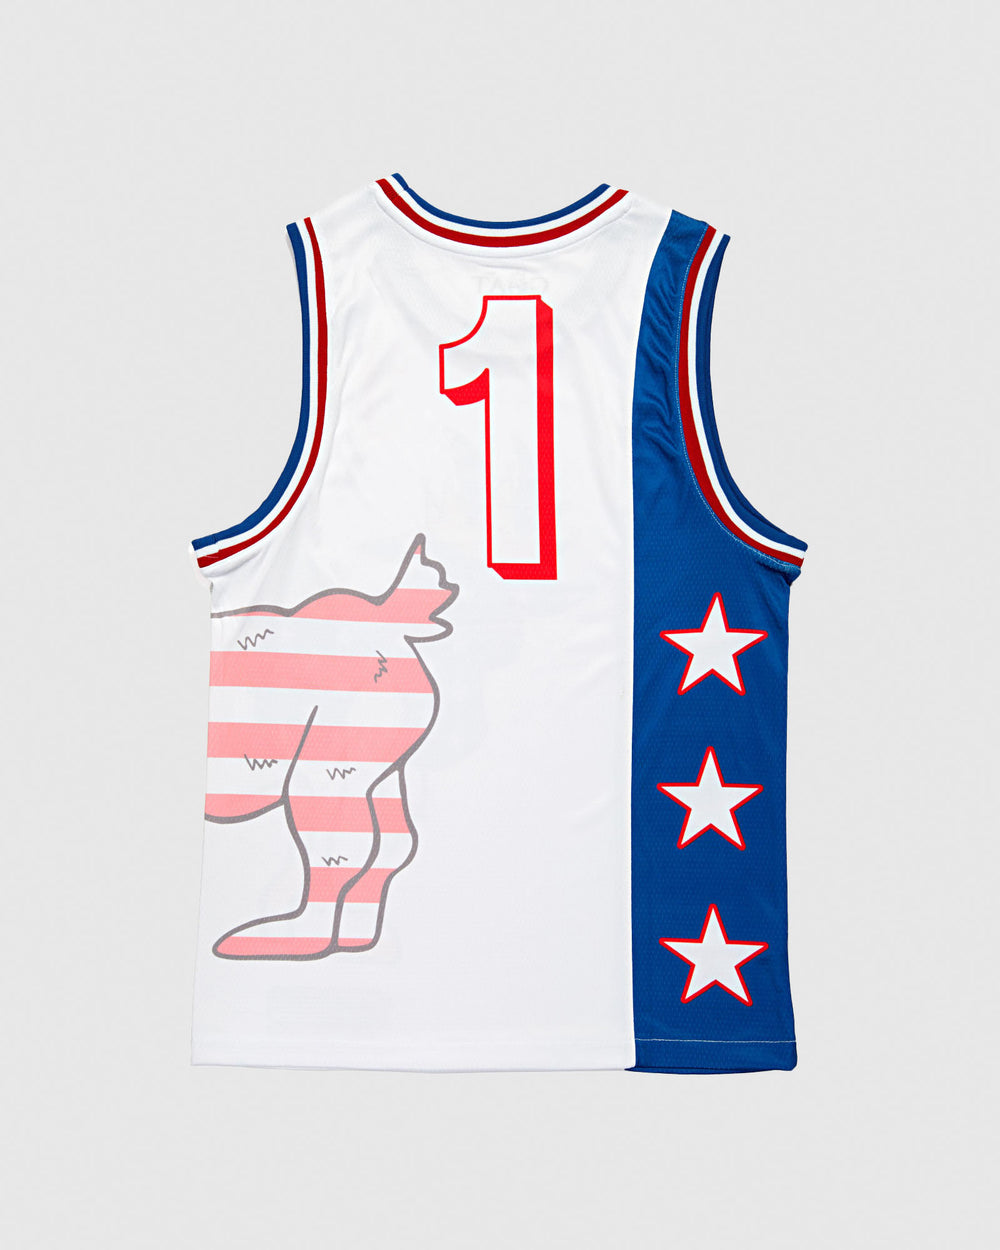 Back of red, white and blue jersey with large American flag goat that wraps around